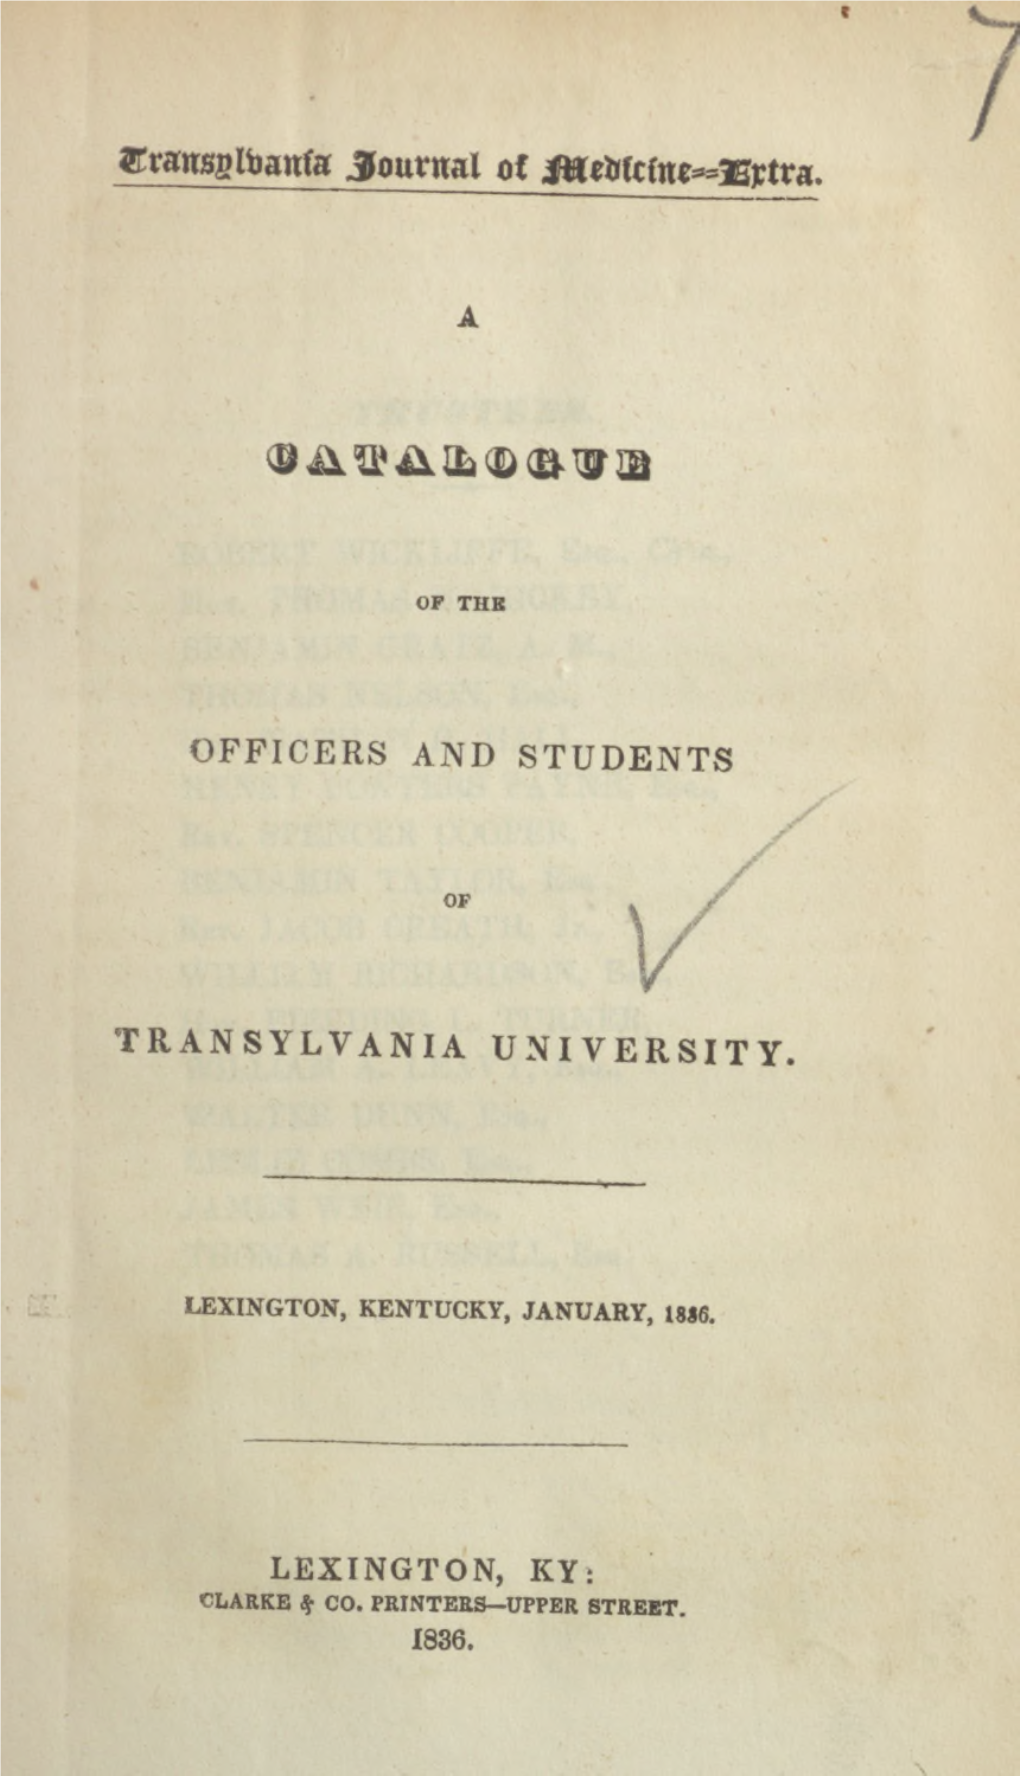 A Catalogue of the Officers and Students of Transylvania University